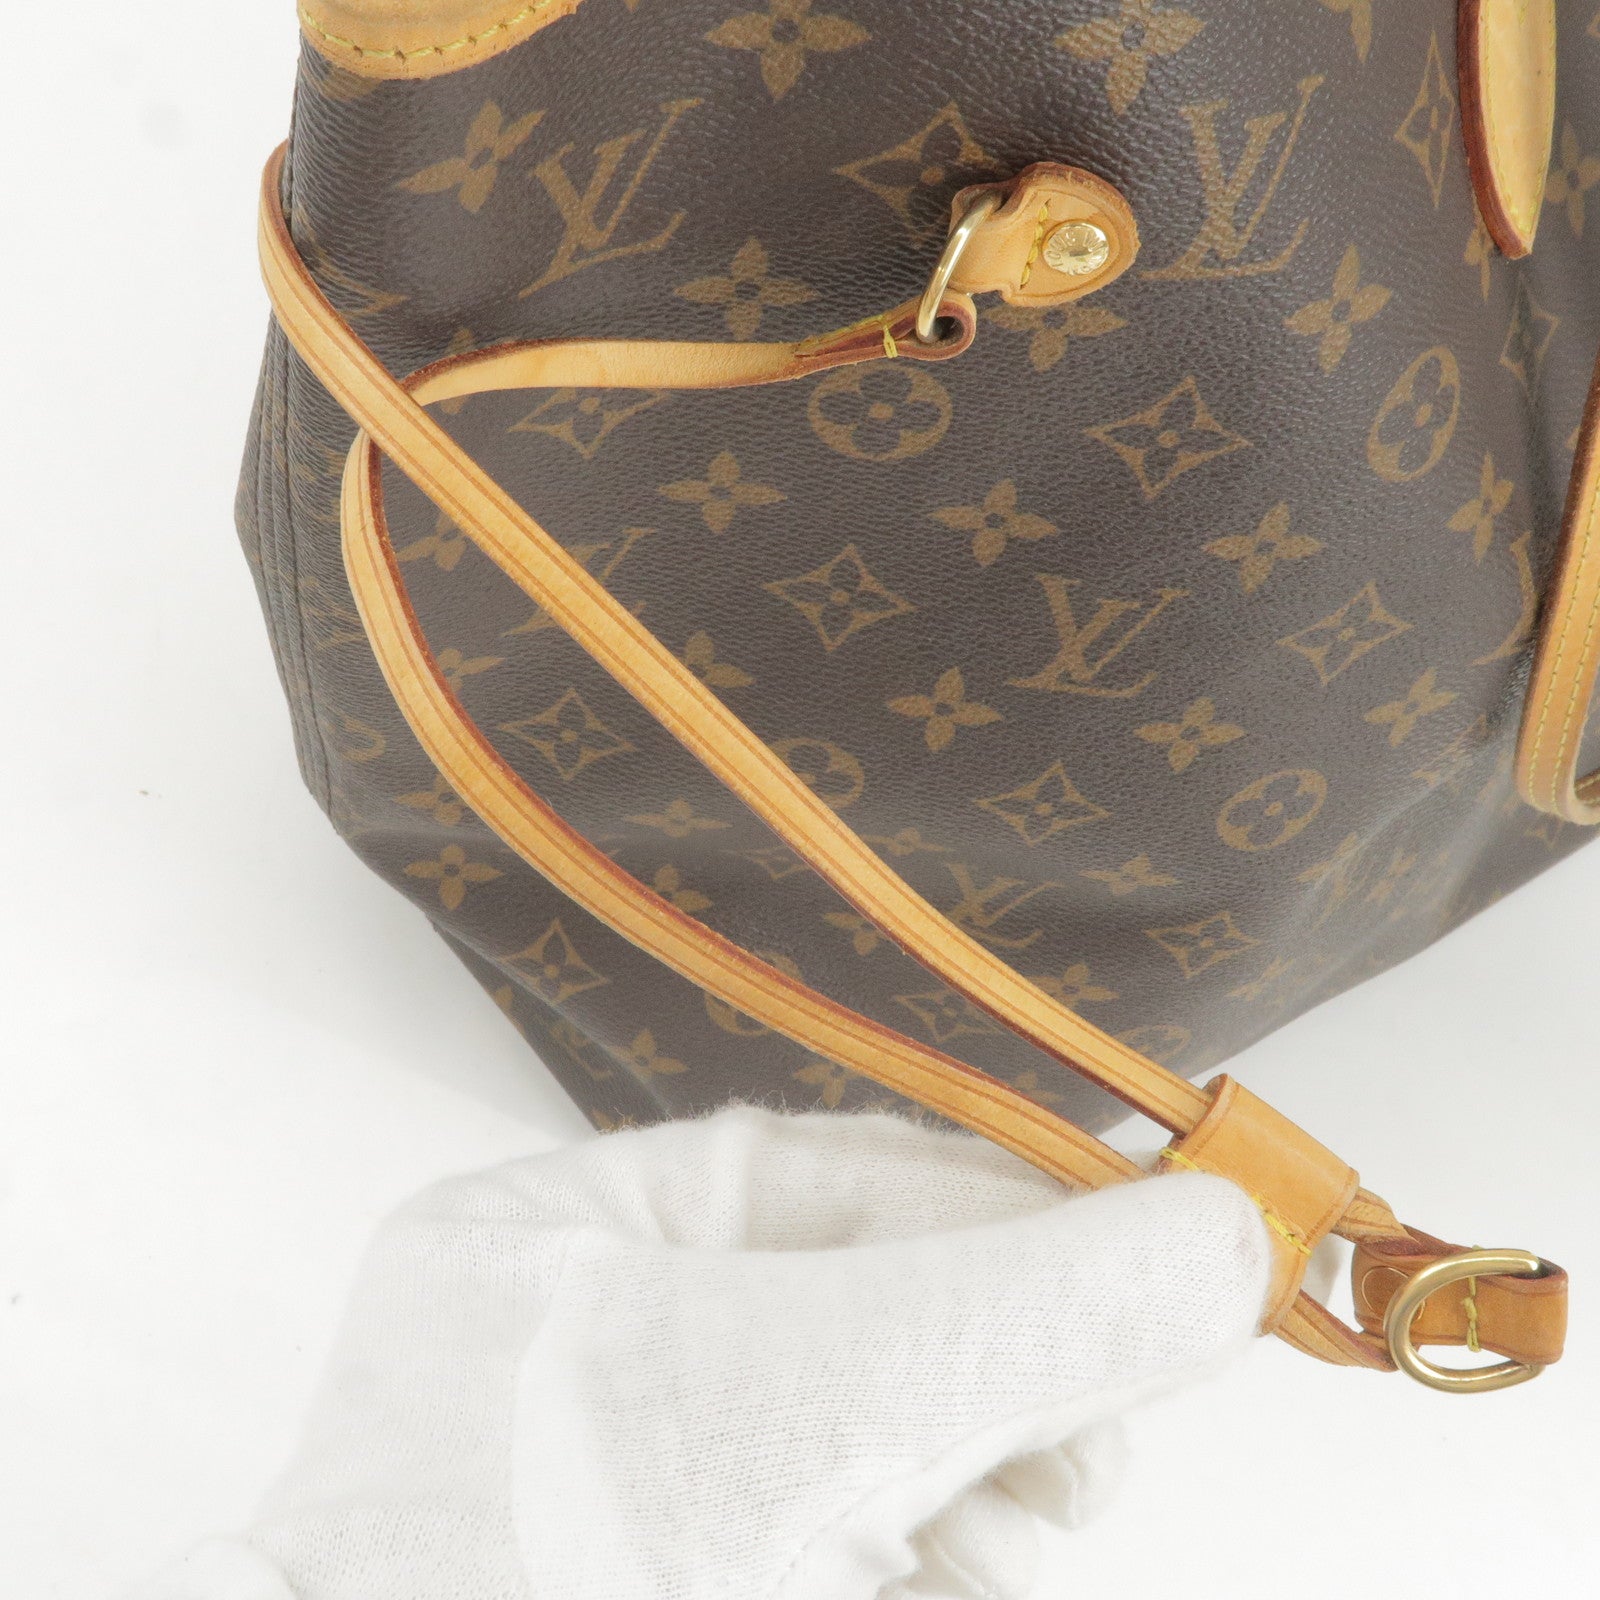 Is Kanye West collaborating with Louis Vuitton?